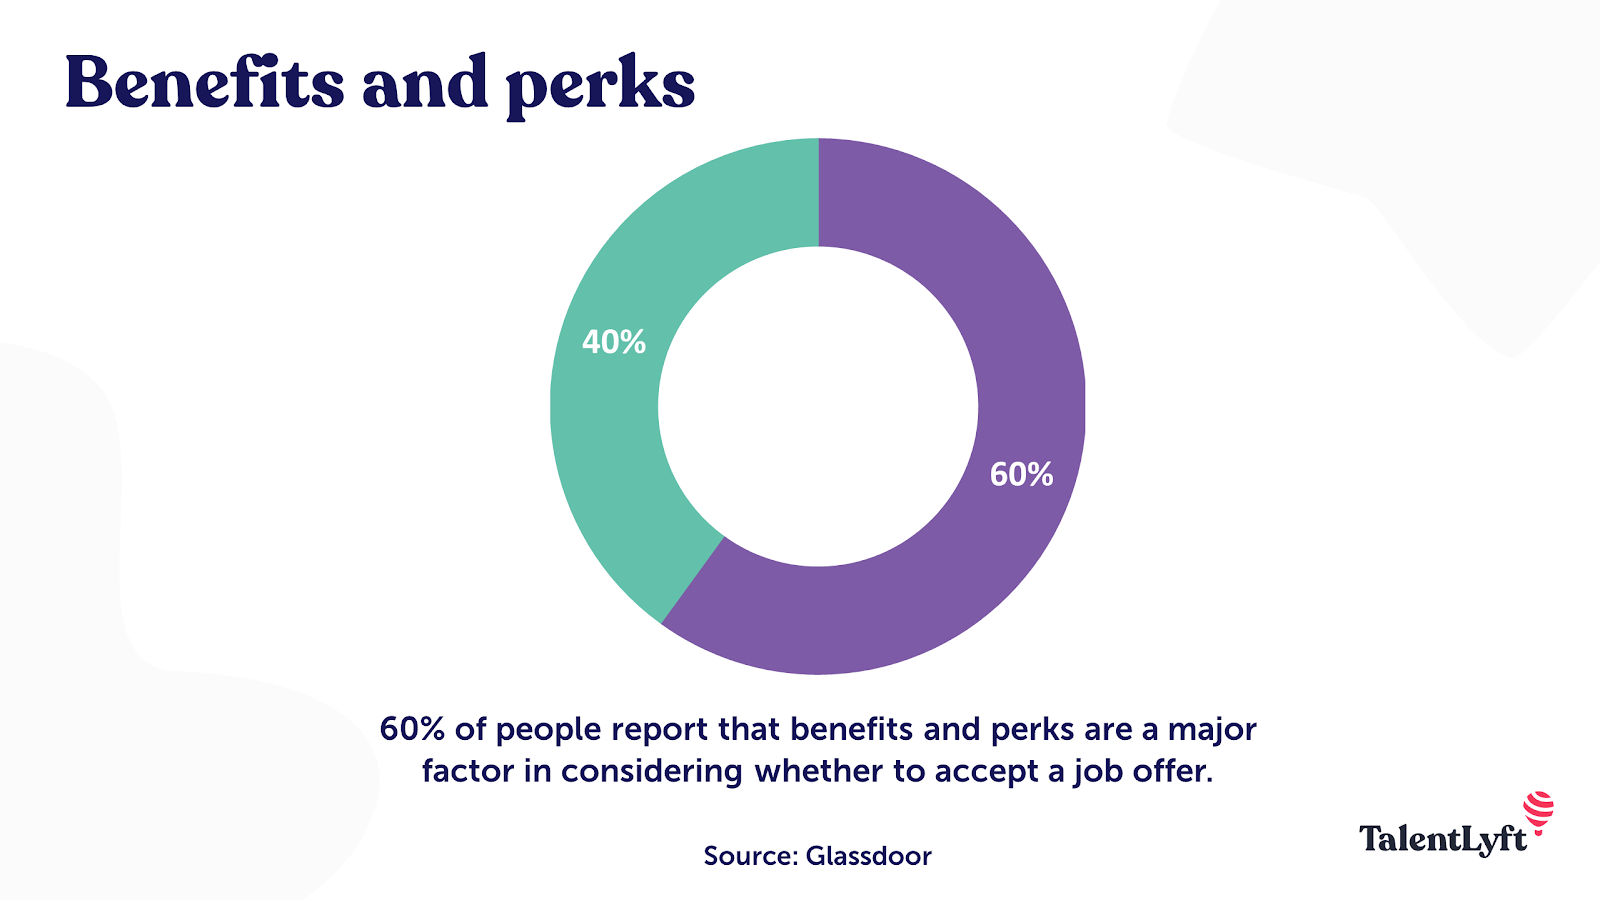 Importance of perks and benefits in hiring and attracting candidates